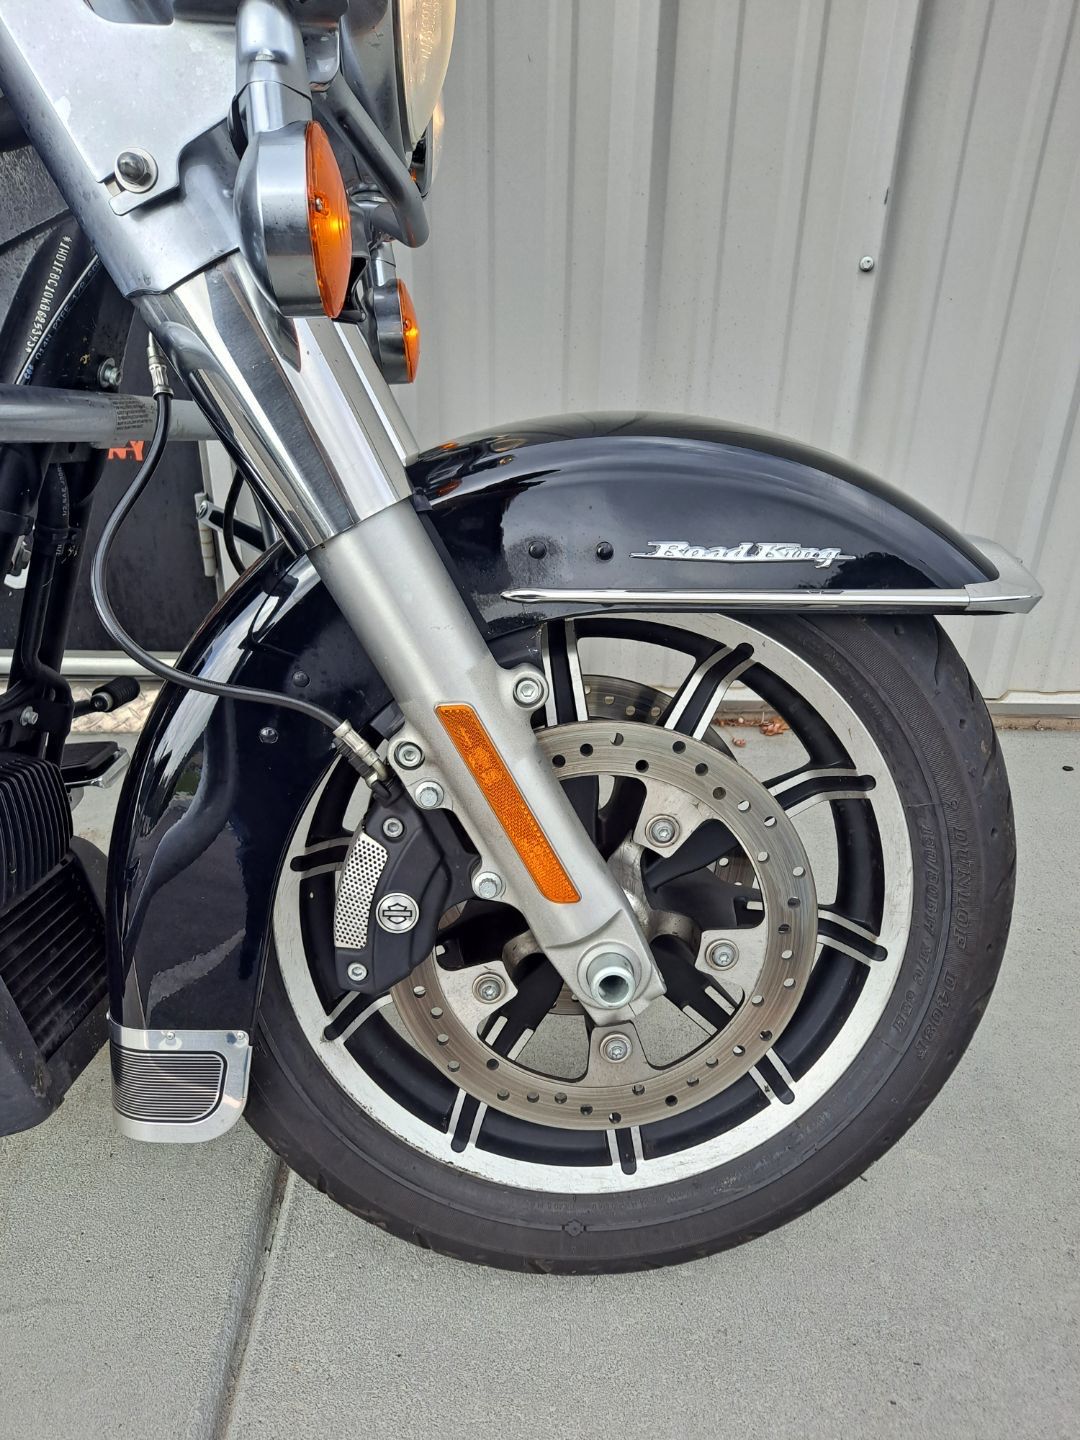 2019 Harley-Davidson Road King® in Clarksville, Tennessee - Photo 3